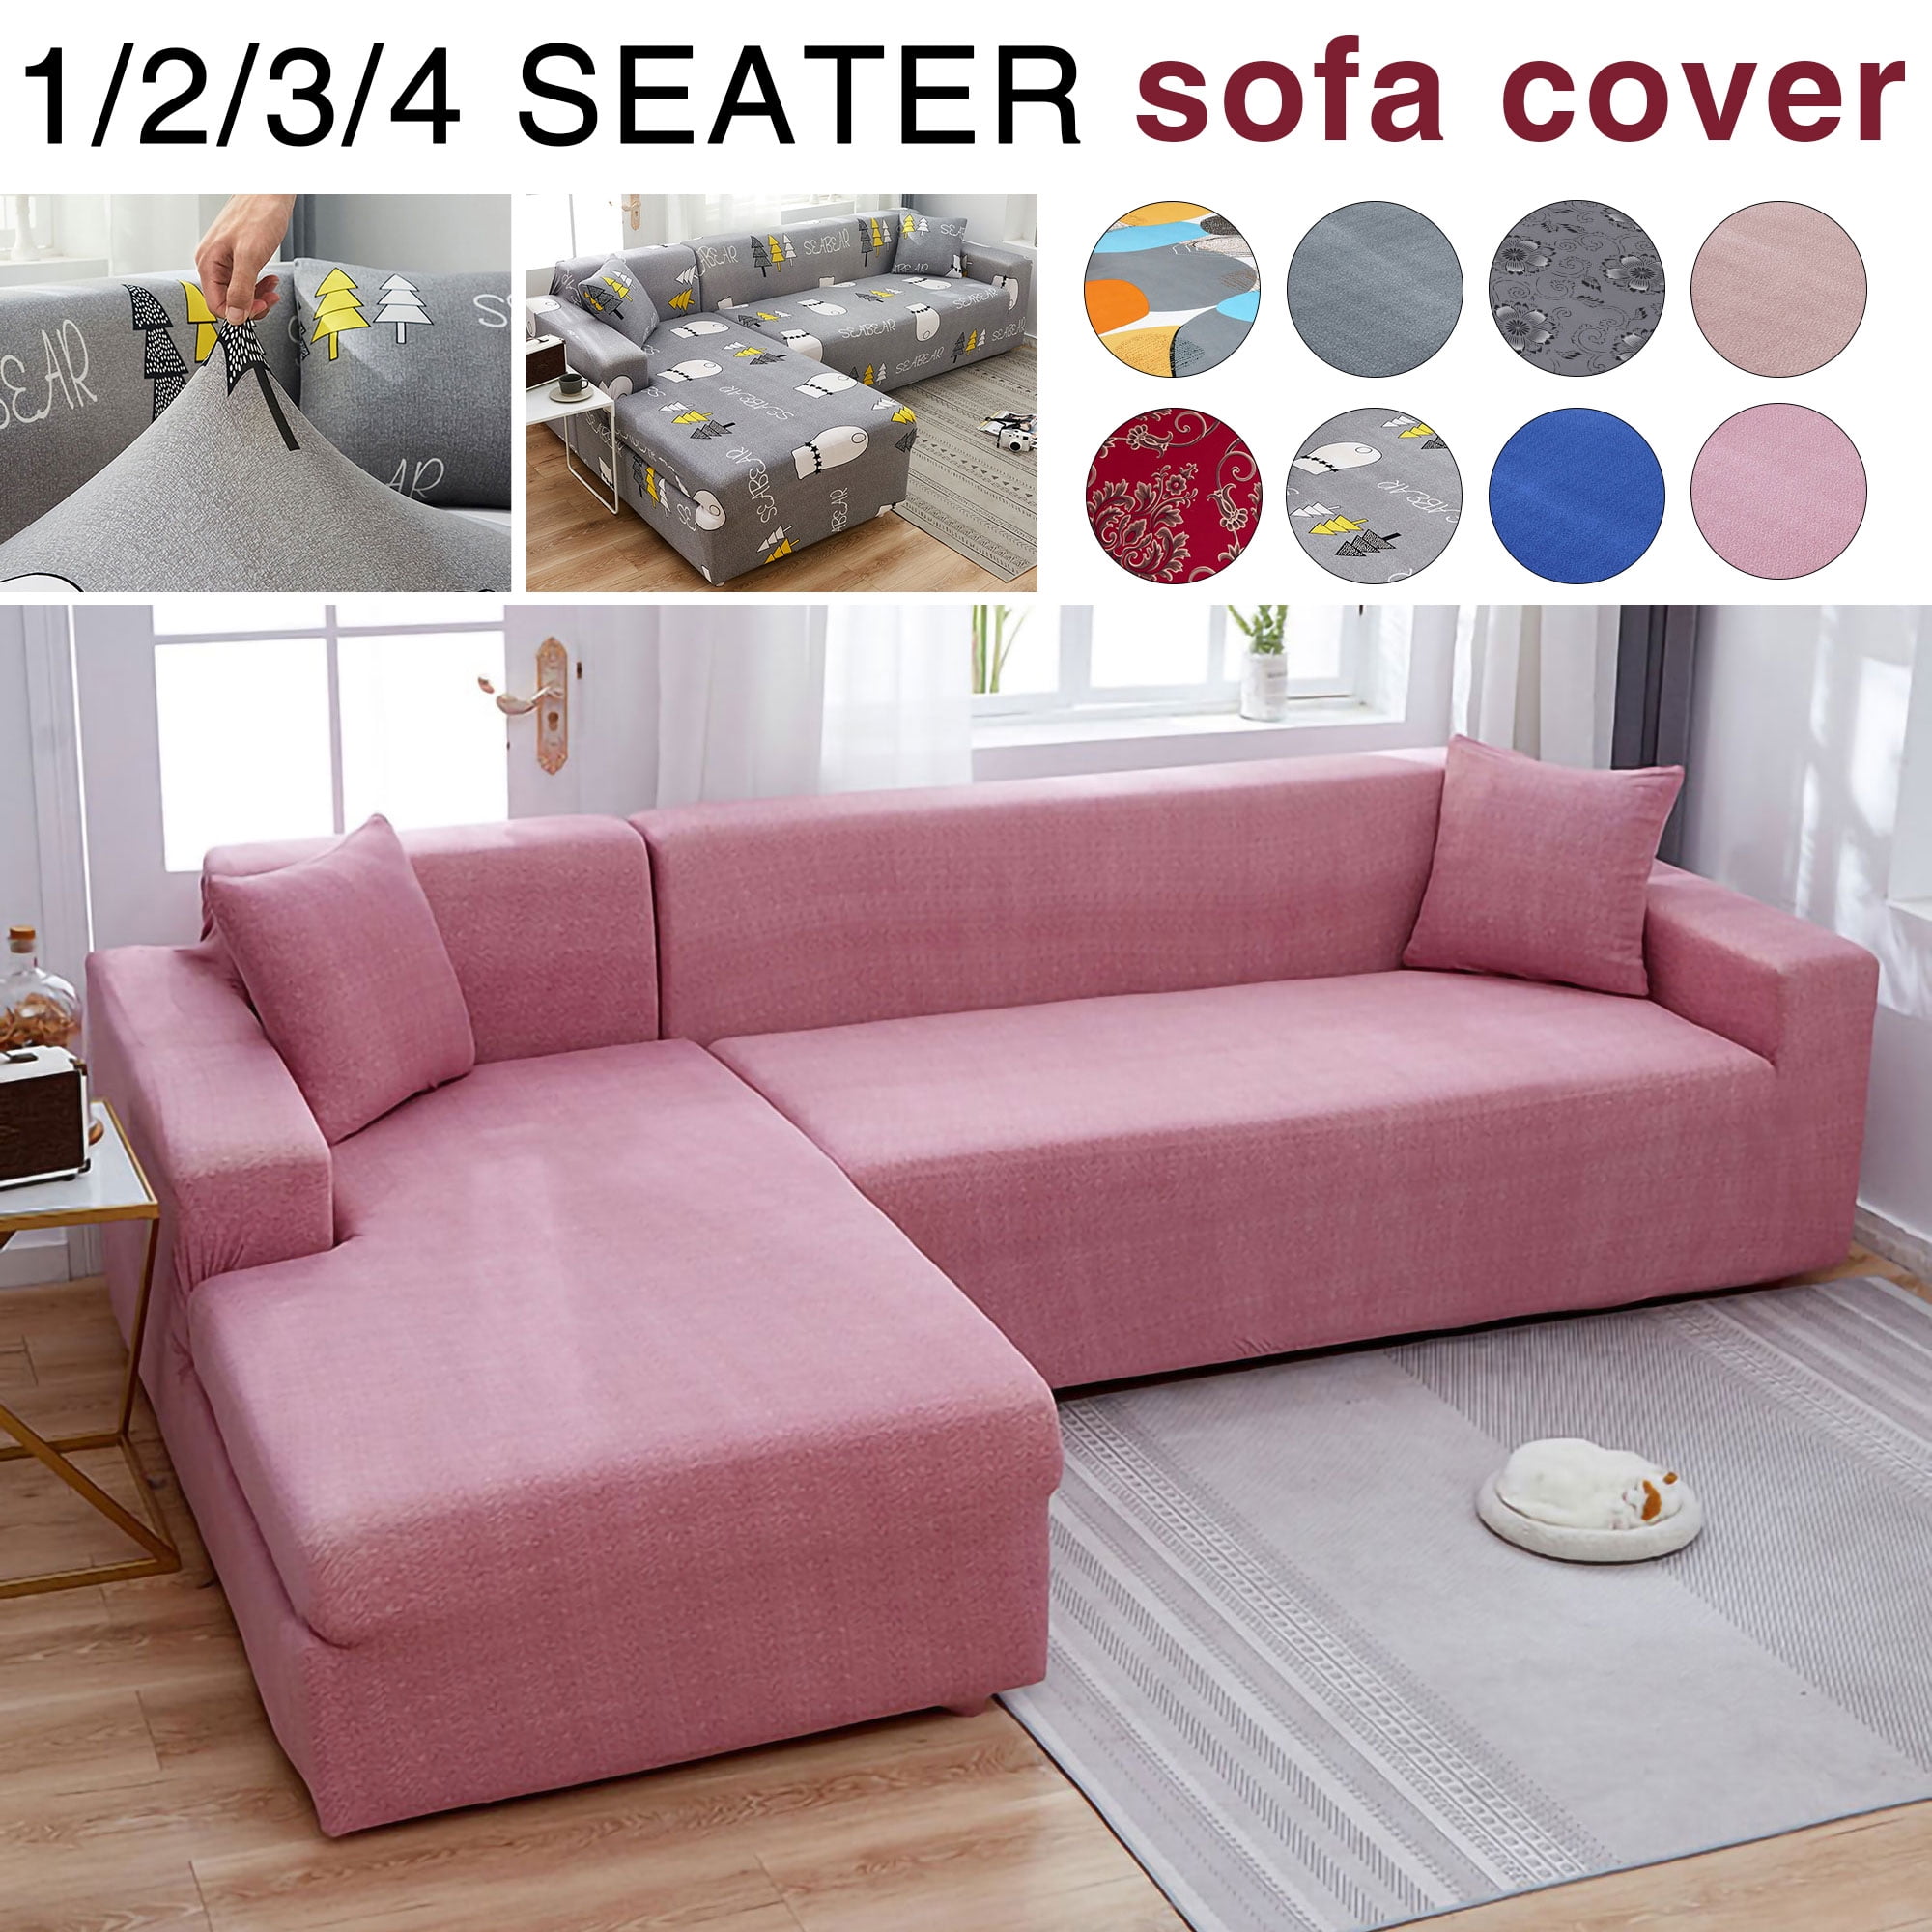 Details about   12 3 4 Seater Elastic Sofa Cover Chair Couch Slipcover Furniture Protector New 